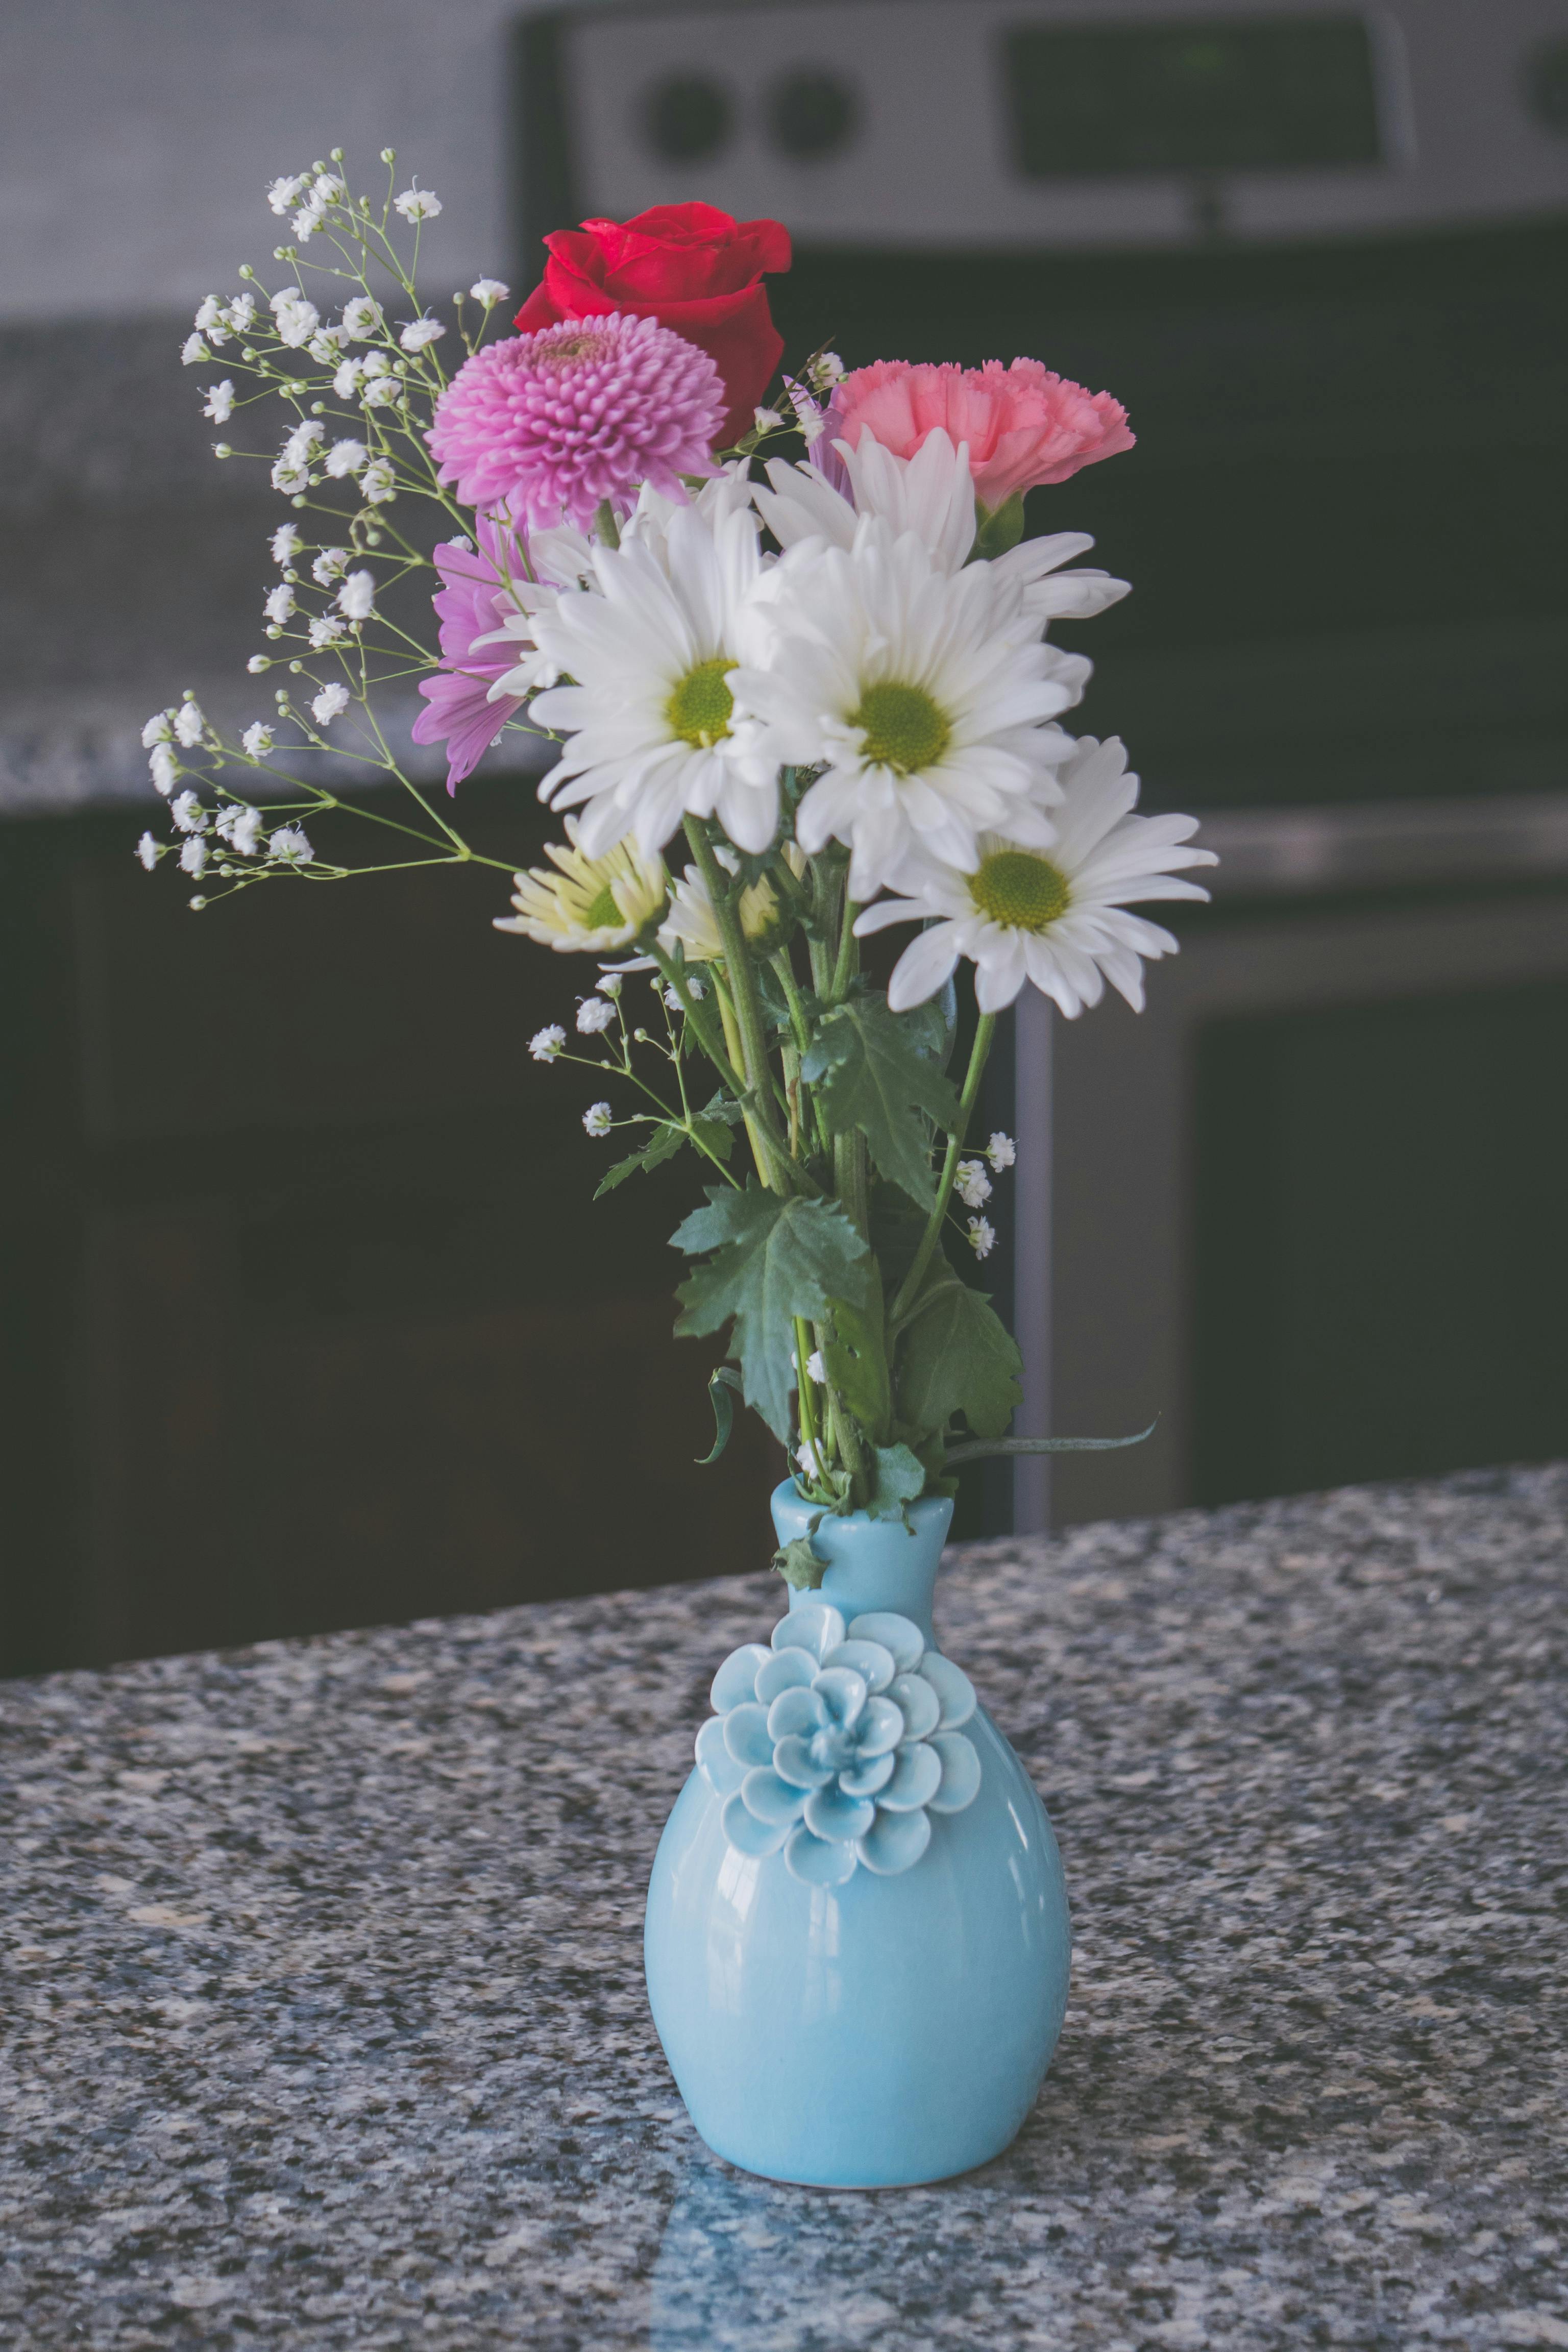 Assorted Flowers  in Blue Vase   Free Stock Photo 